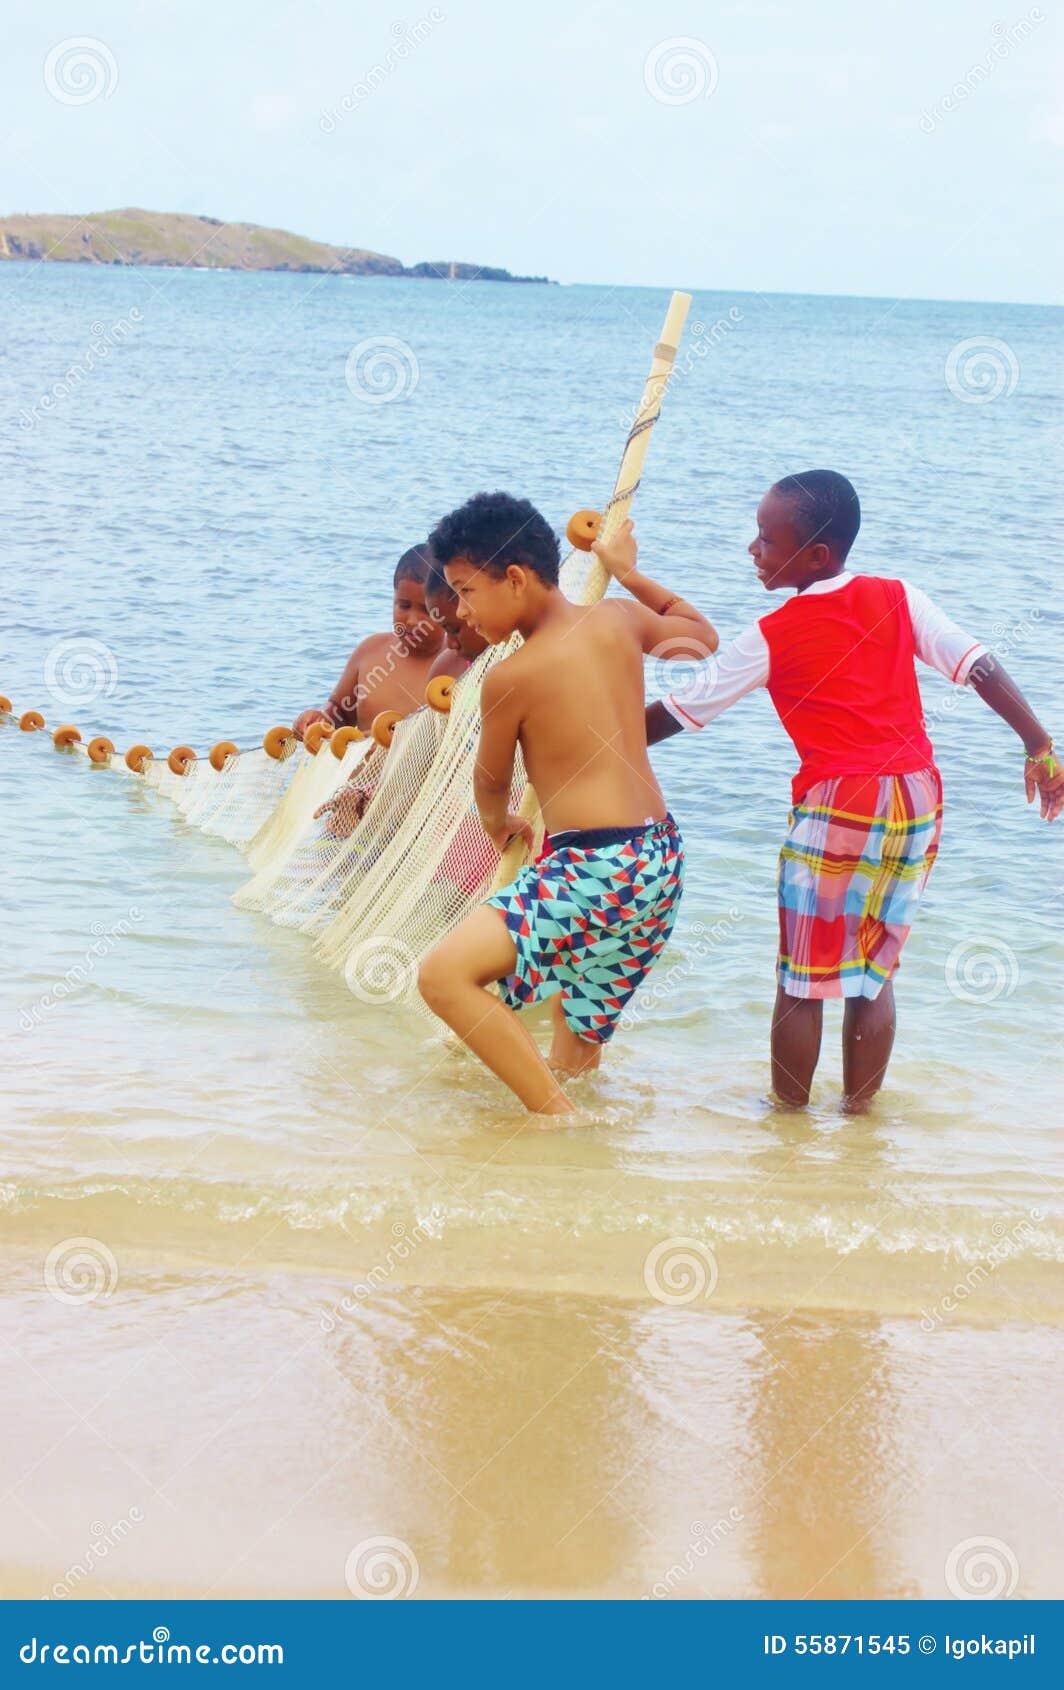 Children with fishing net editorial image. Image of experienced